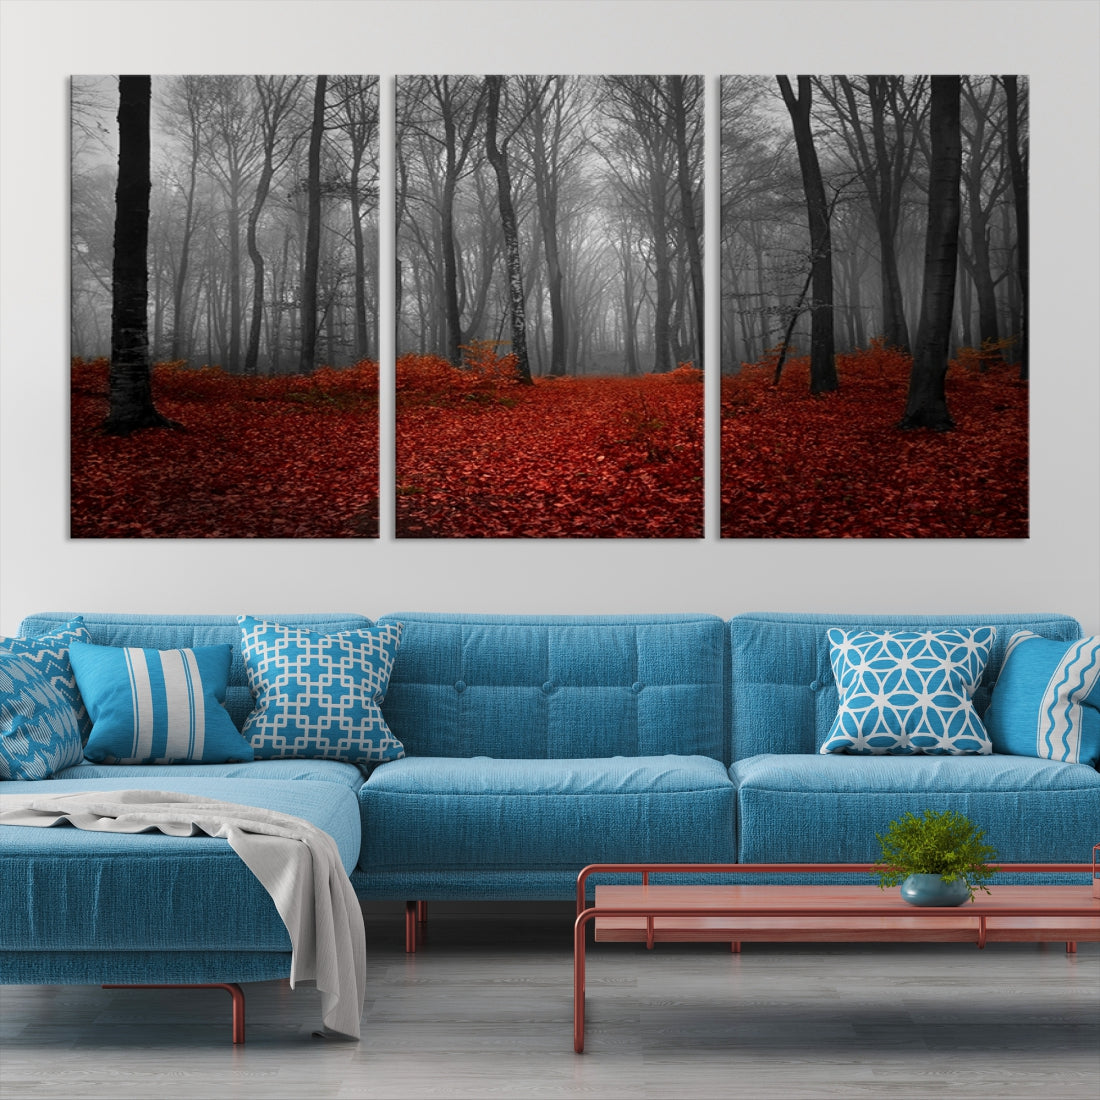 Large Wall Art Landscape Canvas Print - Wonderful Forest with Red Leaves on Ground